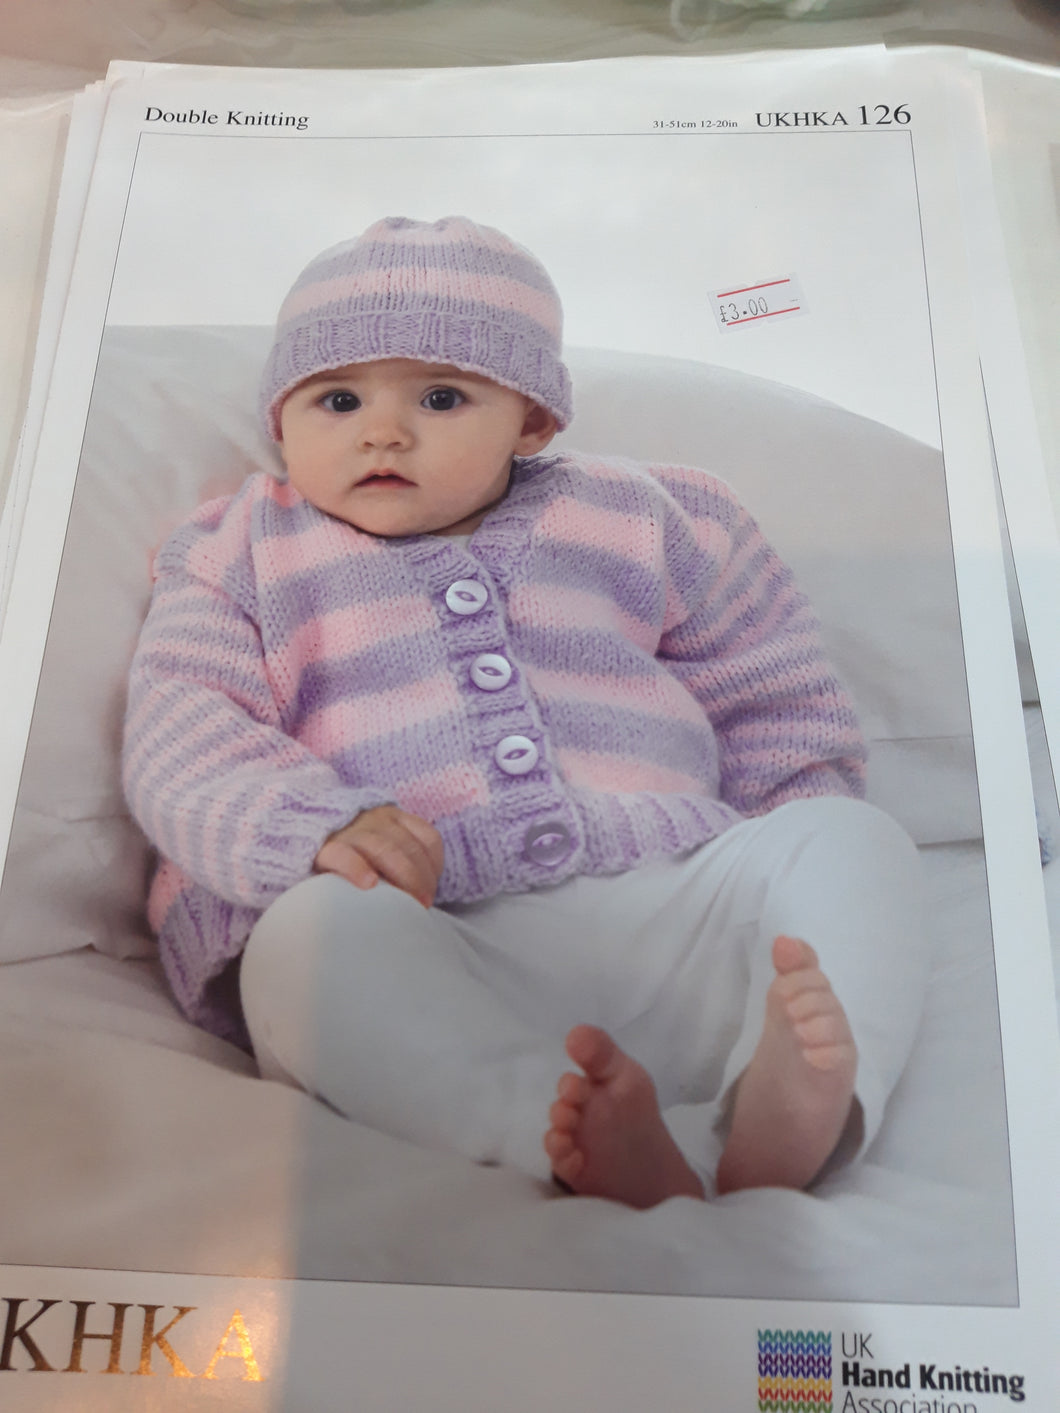 UKHKA 126 - Baby Double Knit - Cardigan, Jumper and Hat - 12